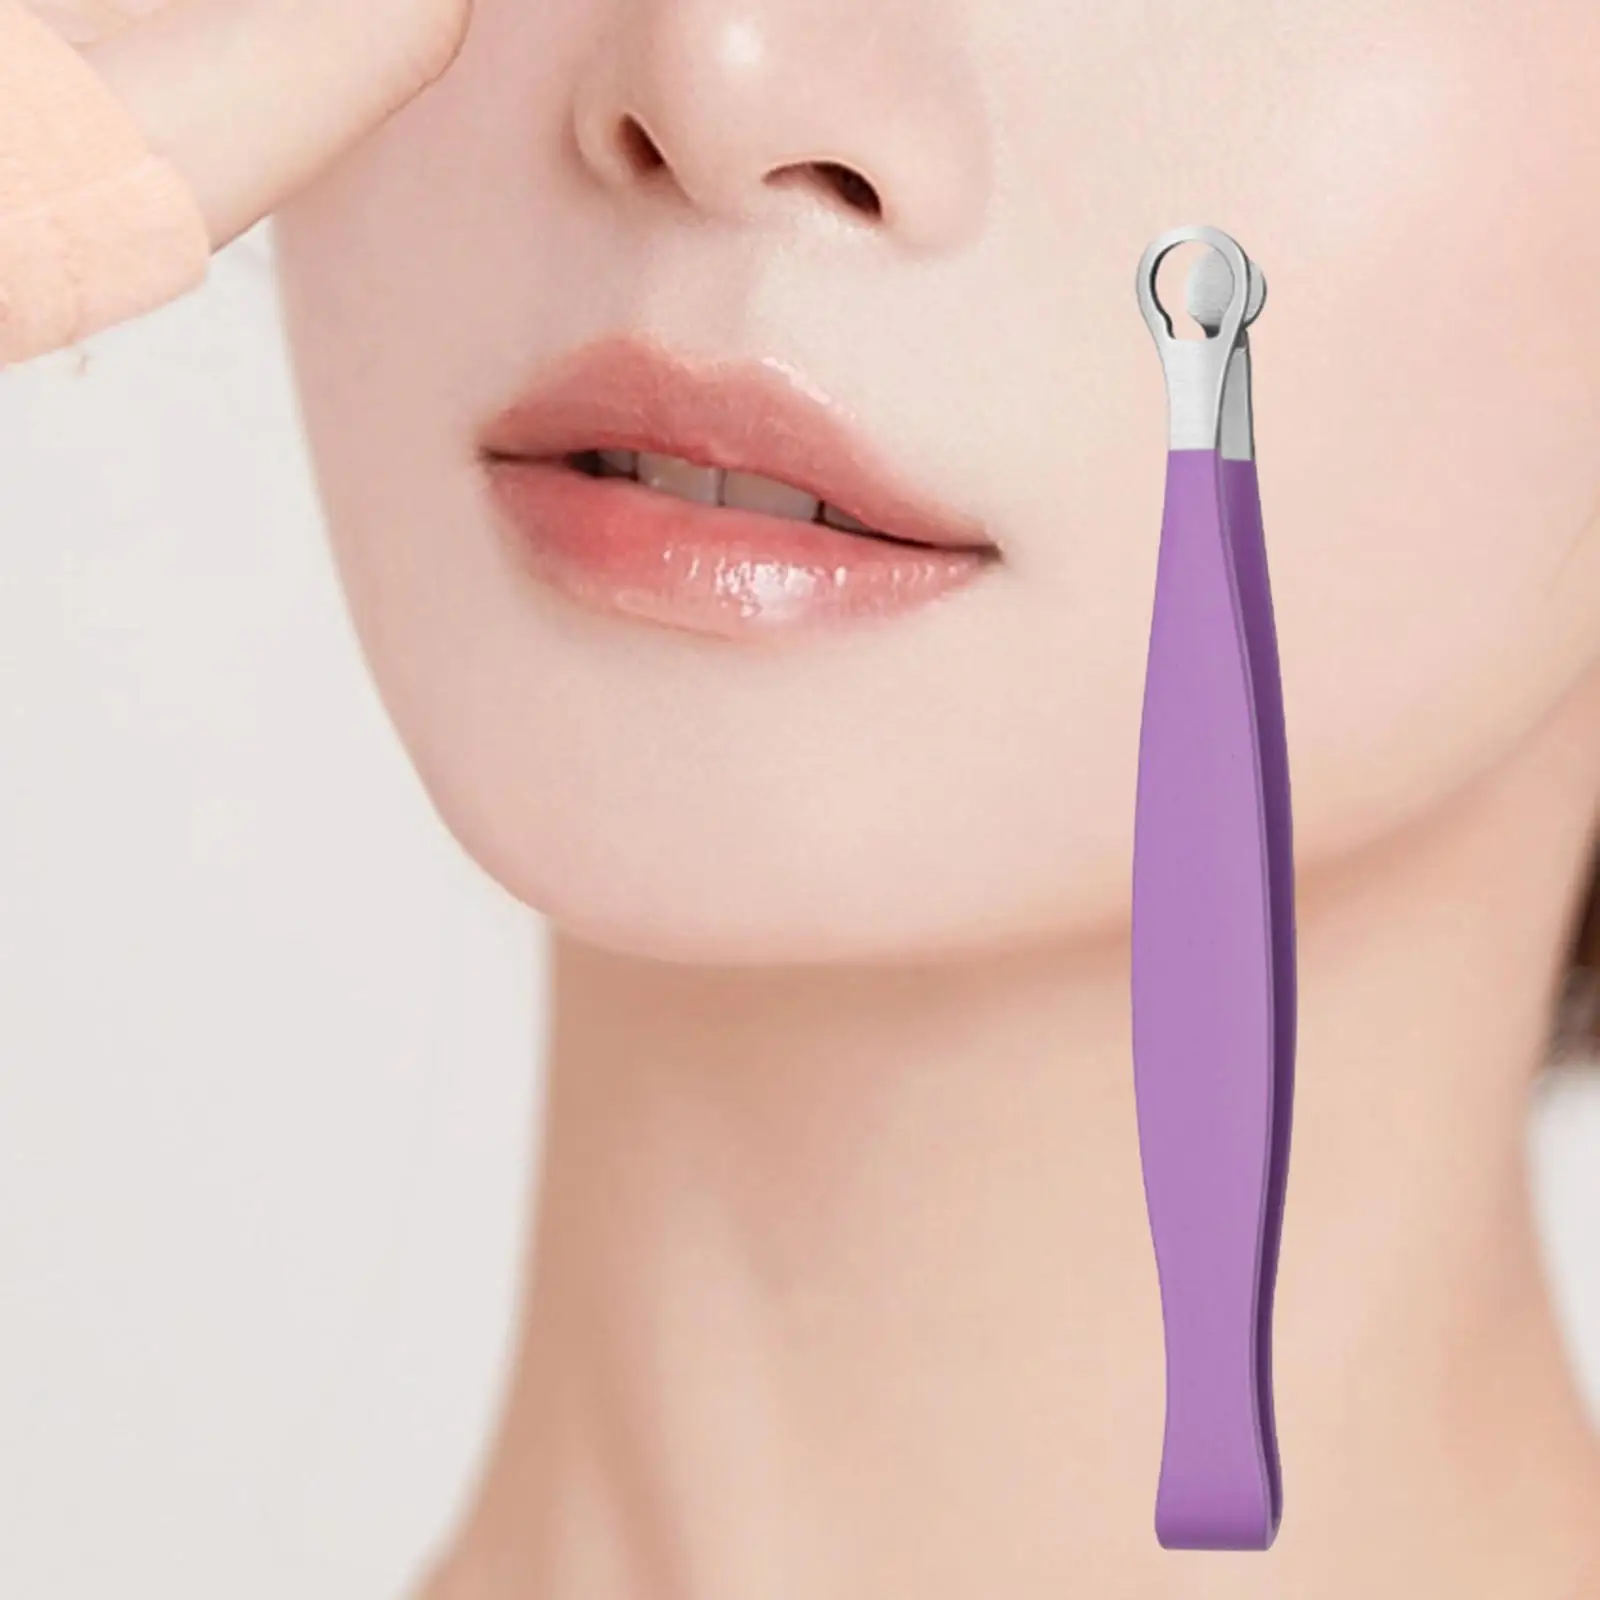 Stainless Steel Round Tip Tweezer for Trimming and Grooming, Universal Nose Hair Trimming Tweezers